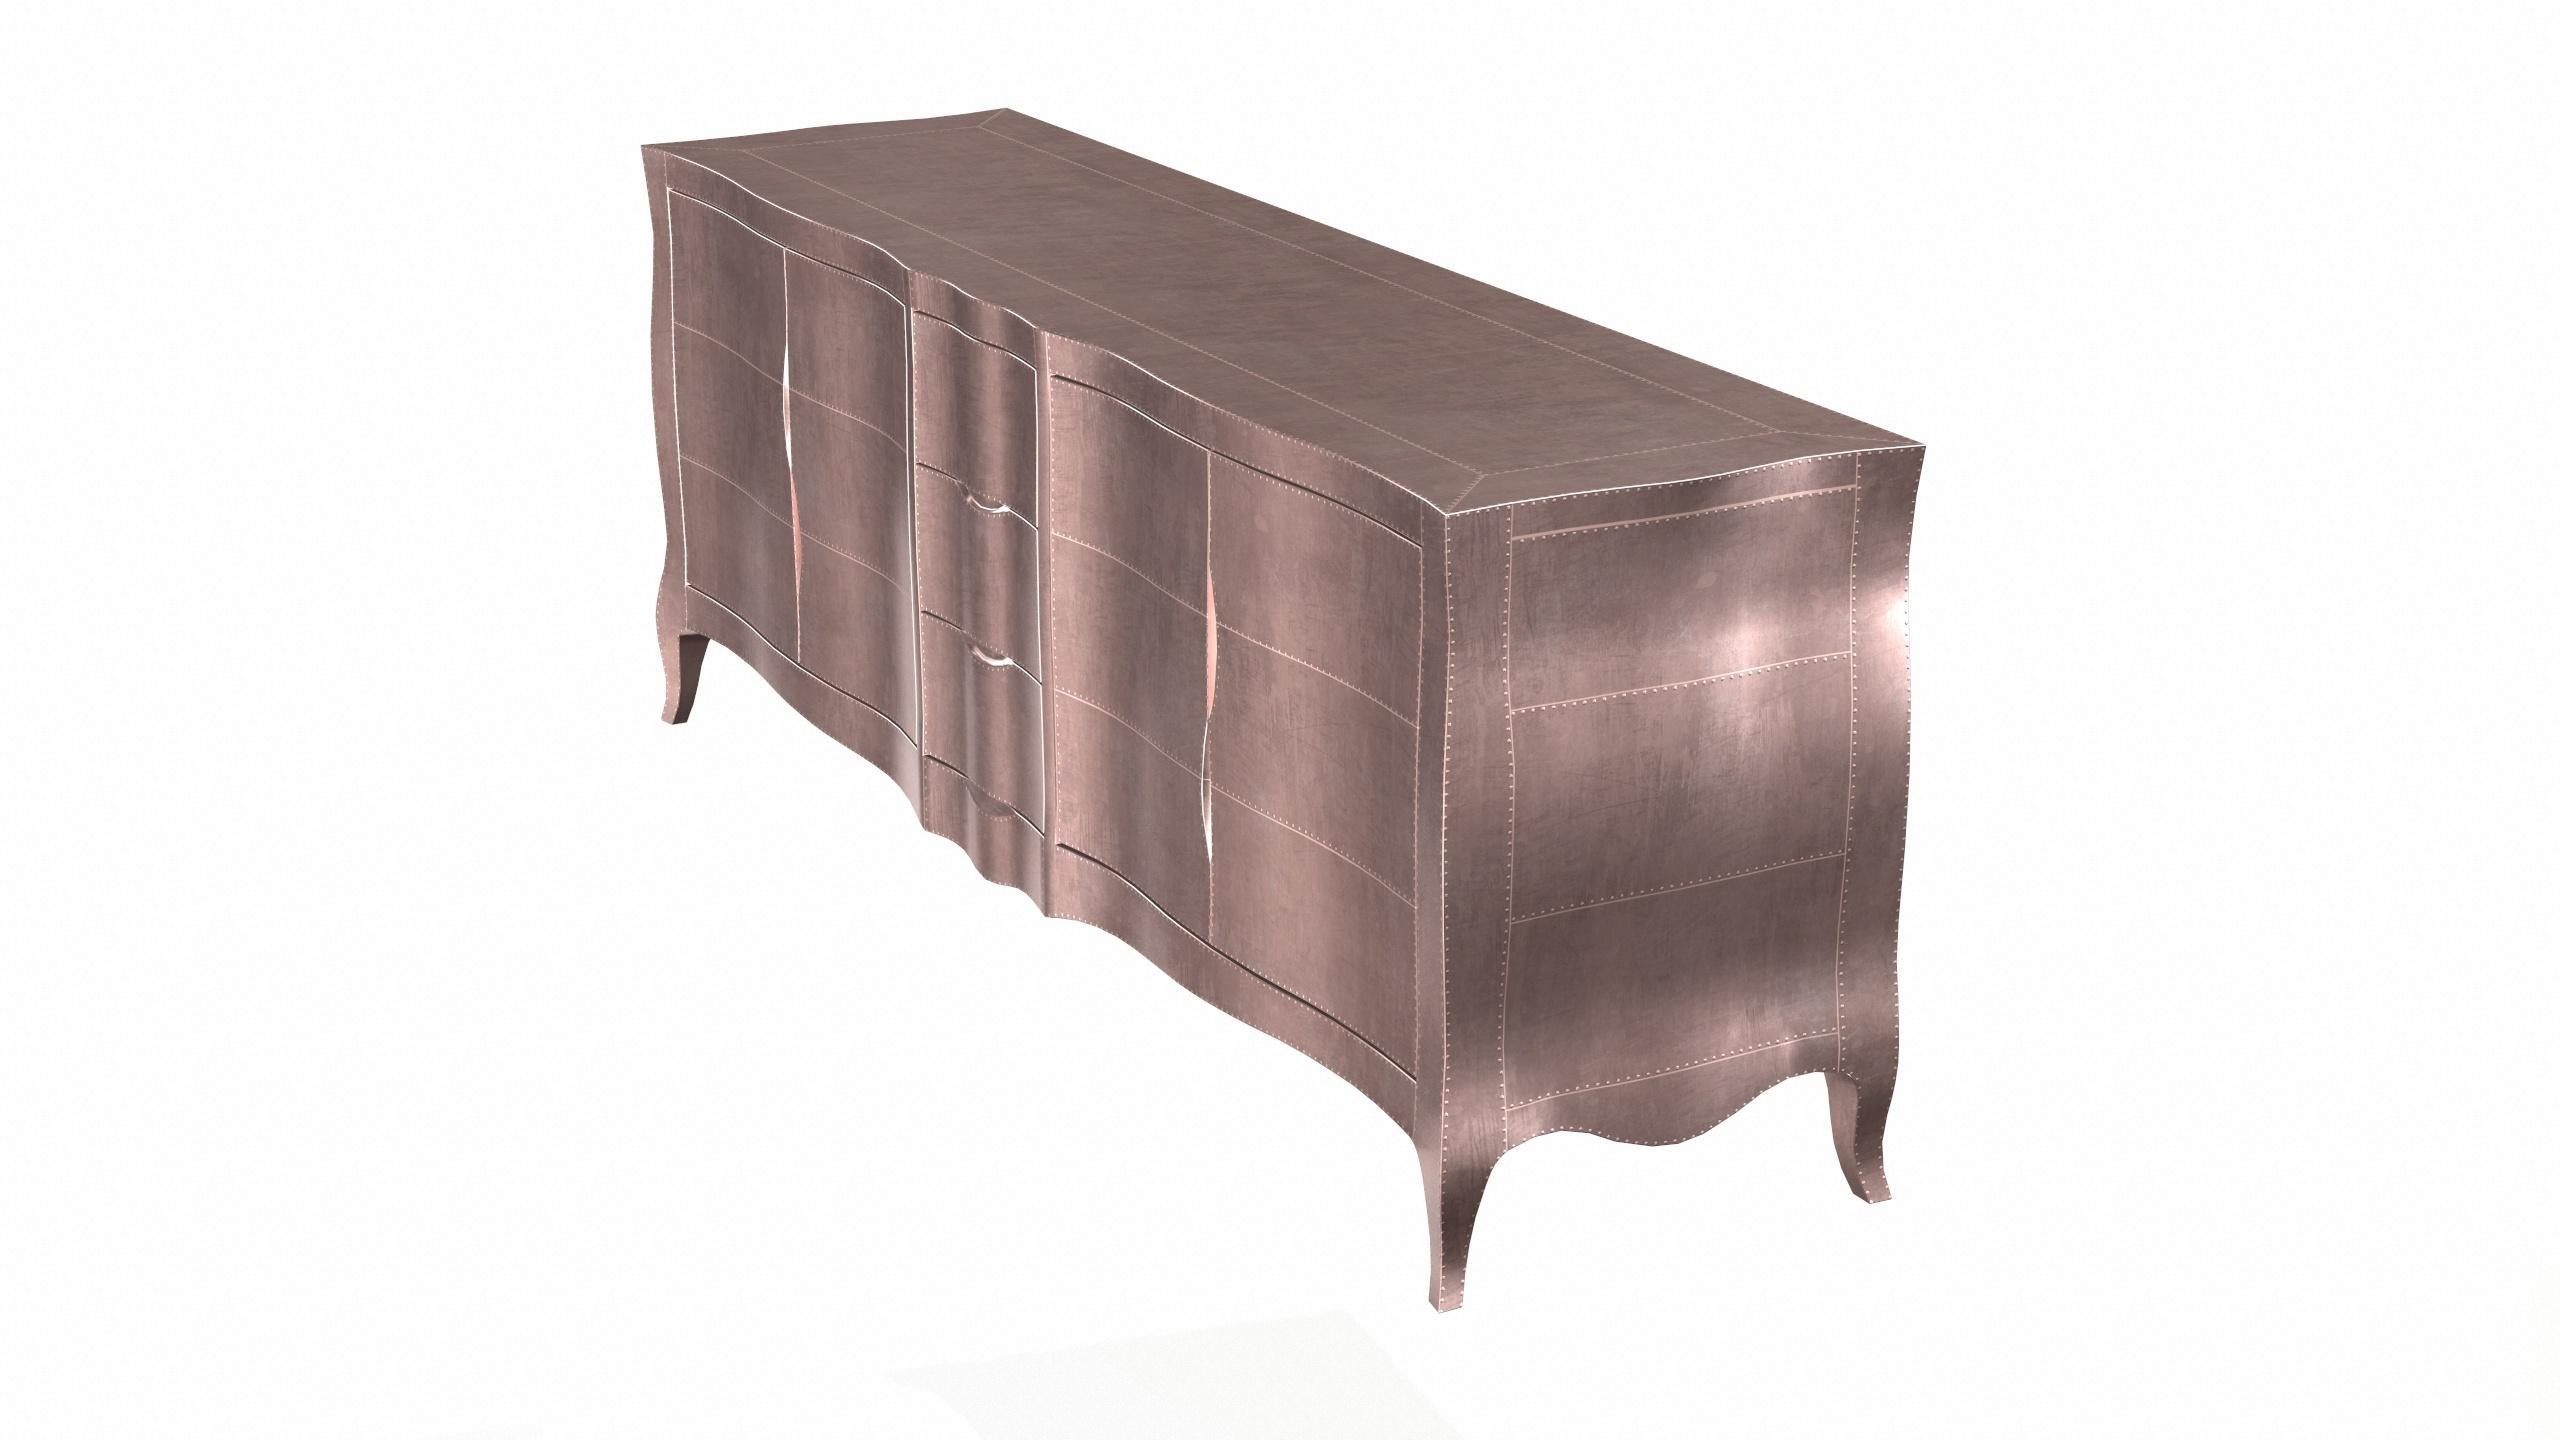 Hand-Carved Louise Credenza Art Deco Dressers in Smooth Copper by Paul Mathieu for S Odegard For Sale